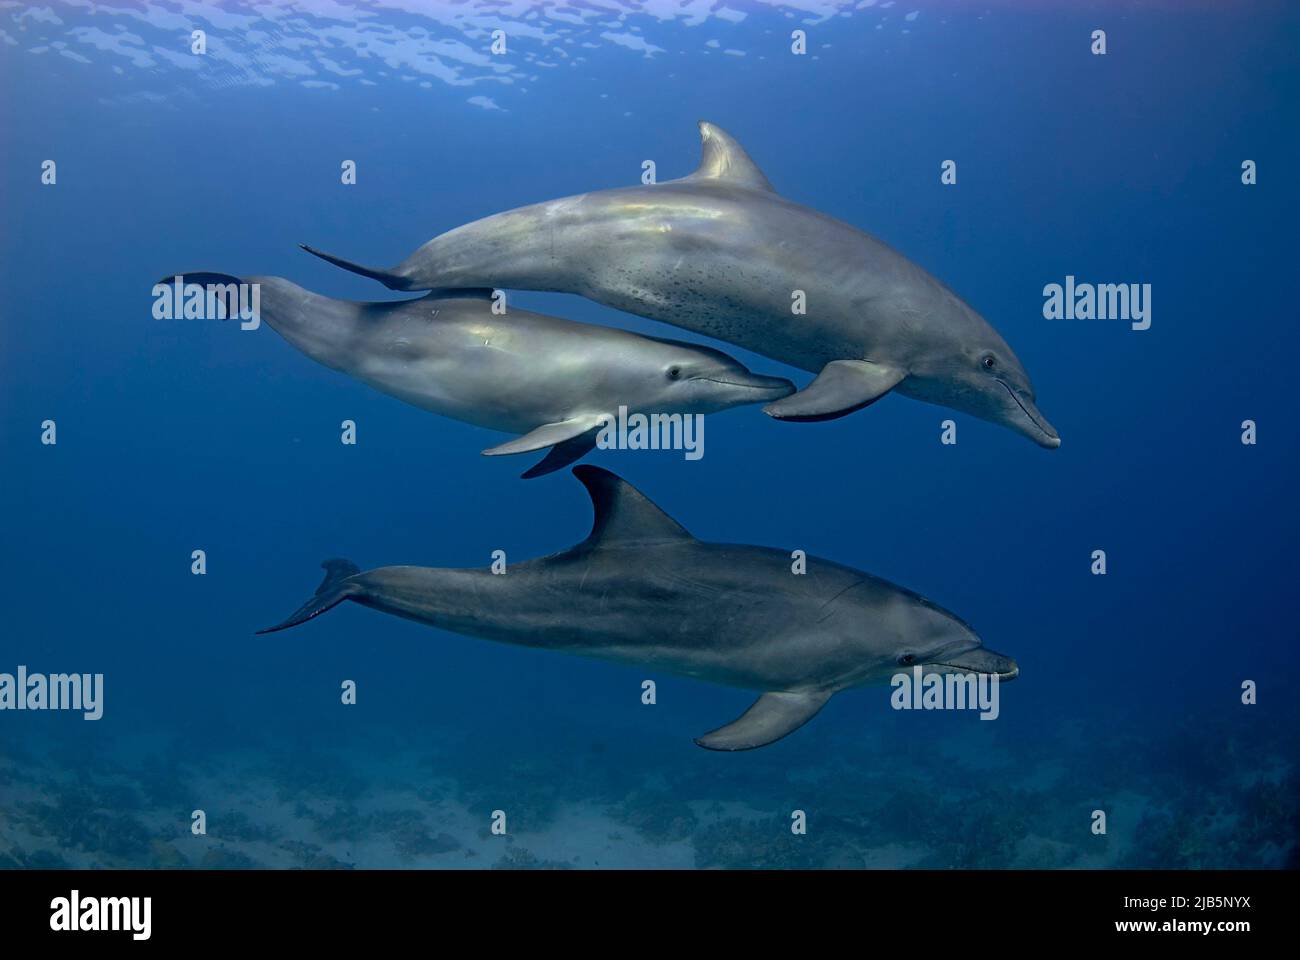 Group of 3 dolphins (tursiops aduncus) swimming in the open sea. Stock Photo